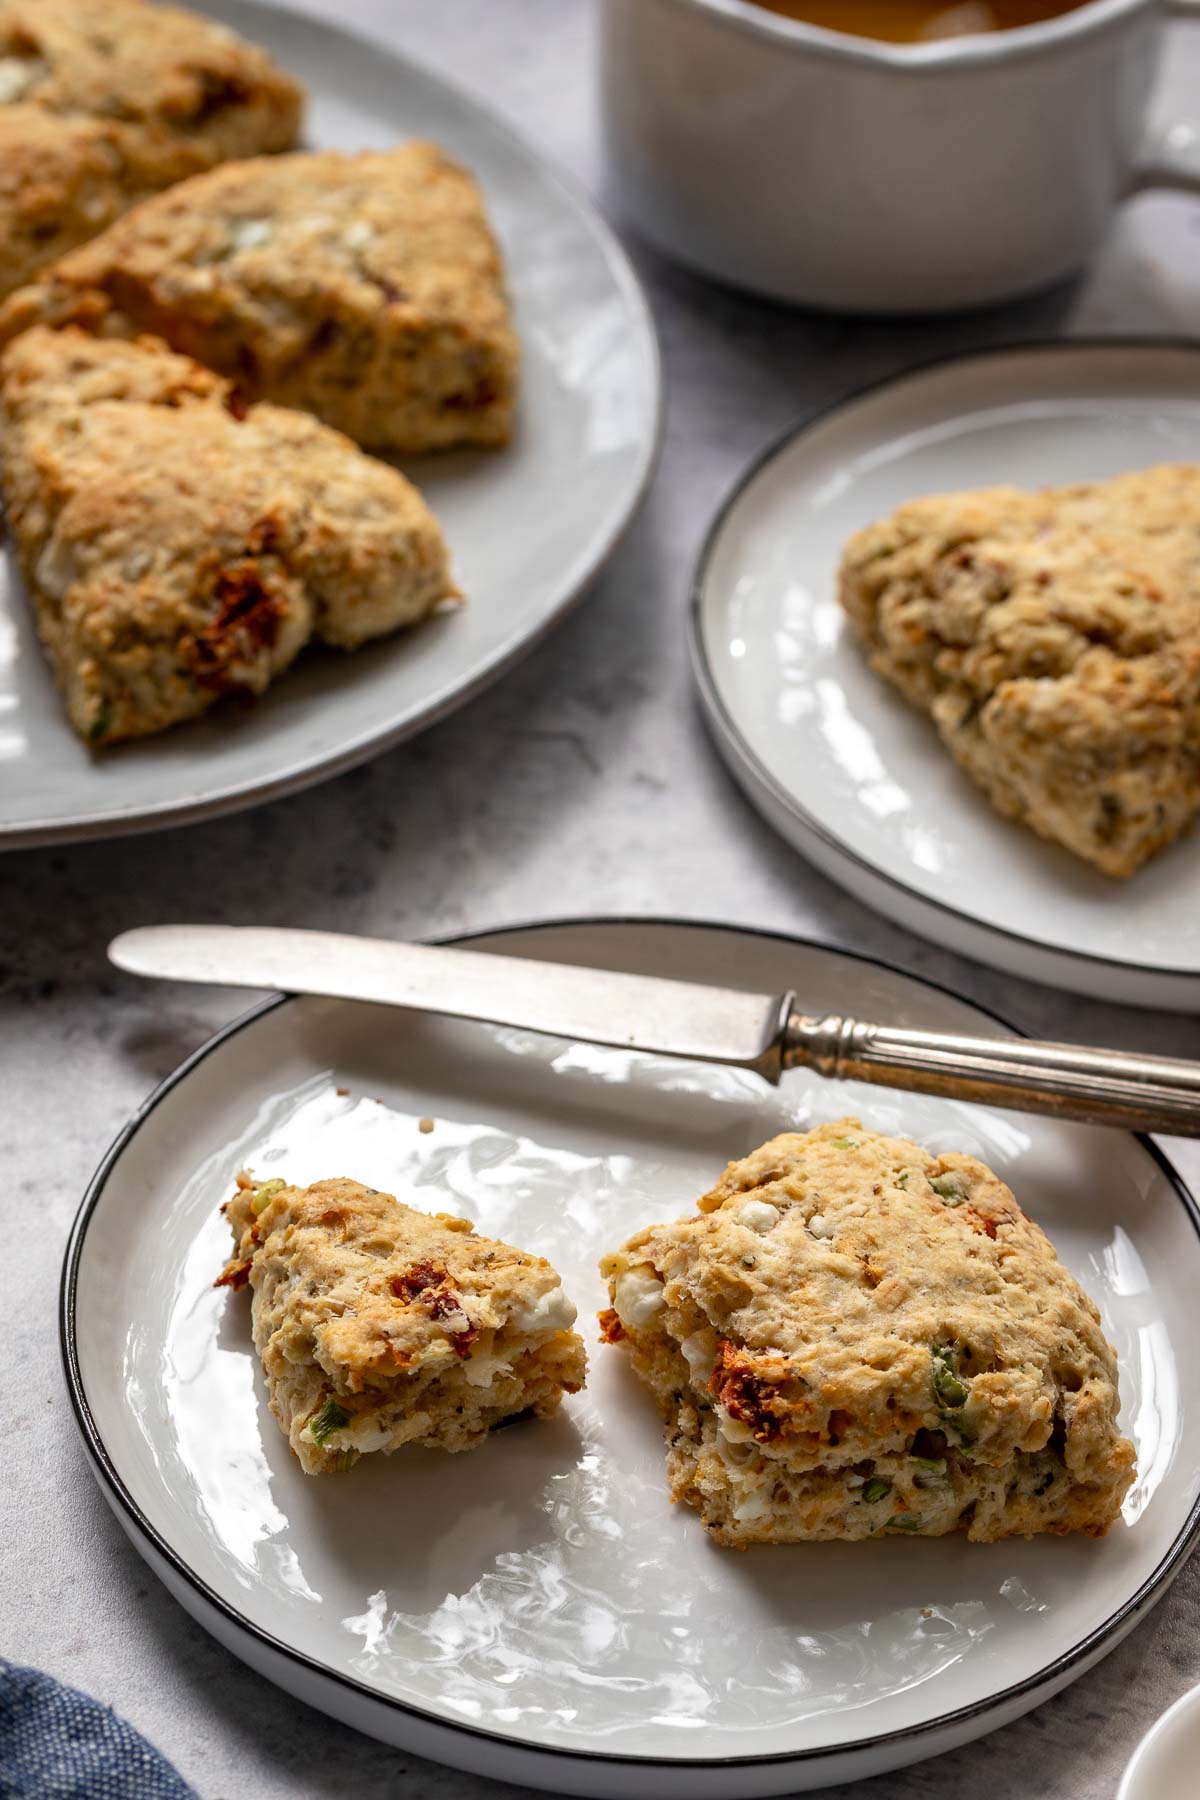 Savory Scones with Feta, Sun-Dried Tomatoes and Herbs